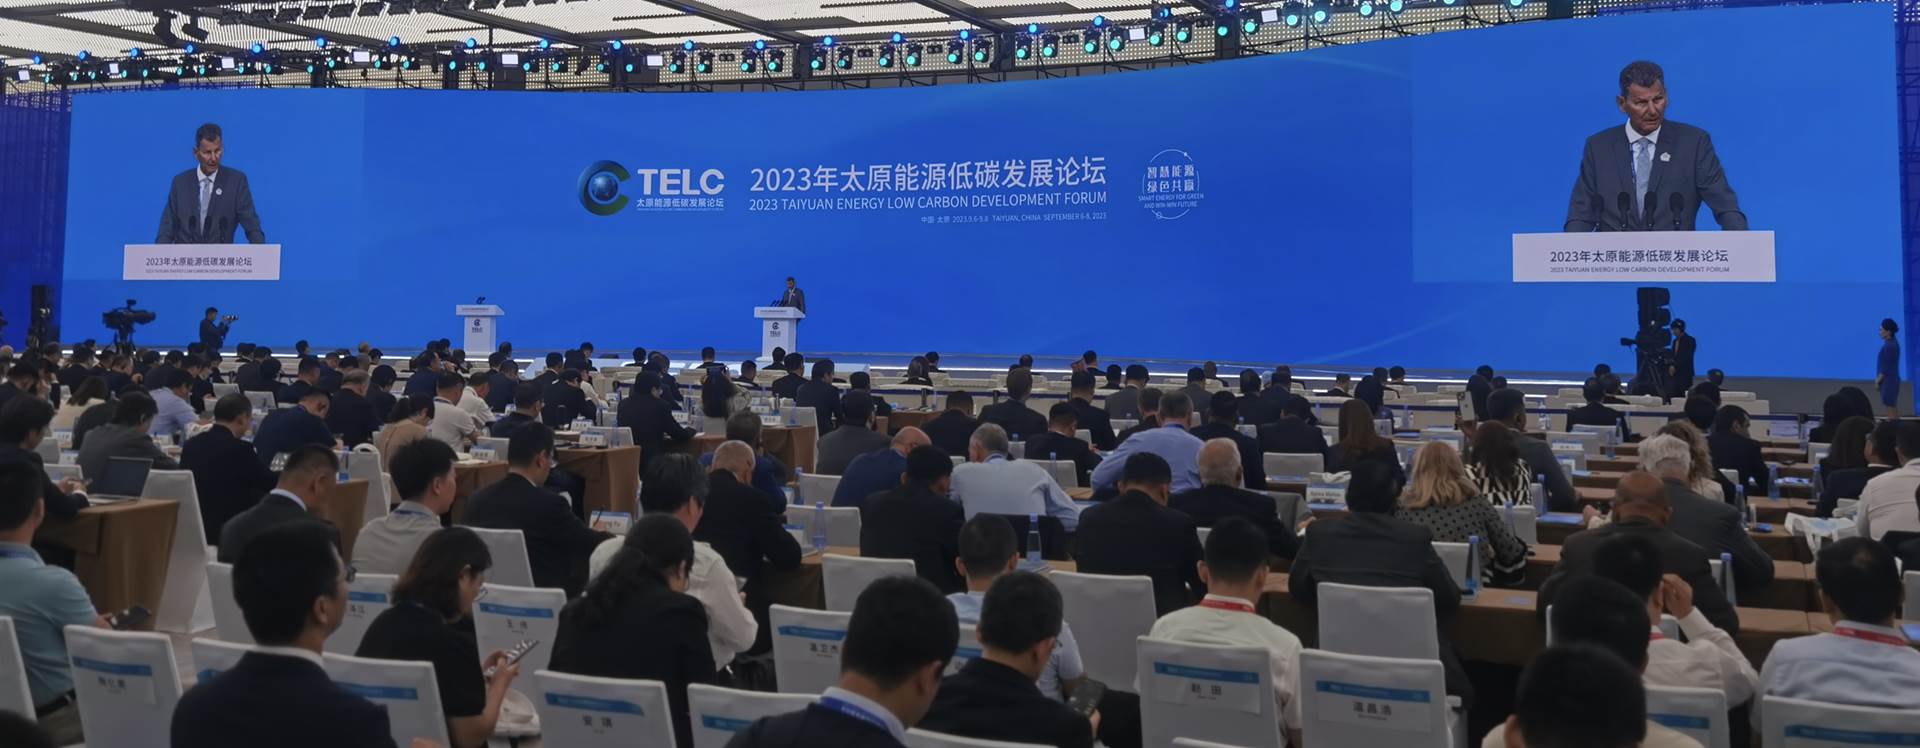 Iceland at the Taiyuan Energy Low Carbon Development Forum 2023 - mynd